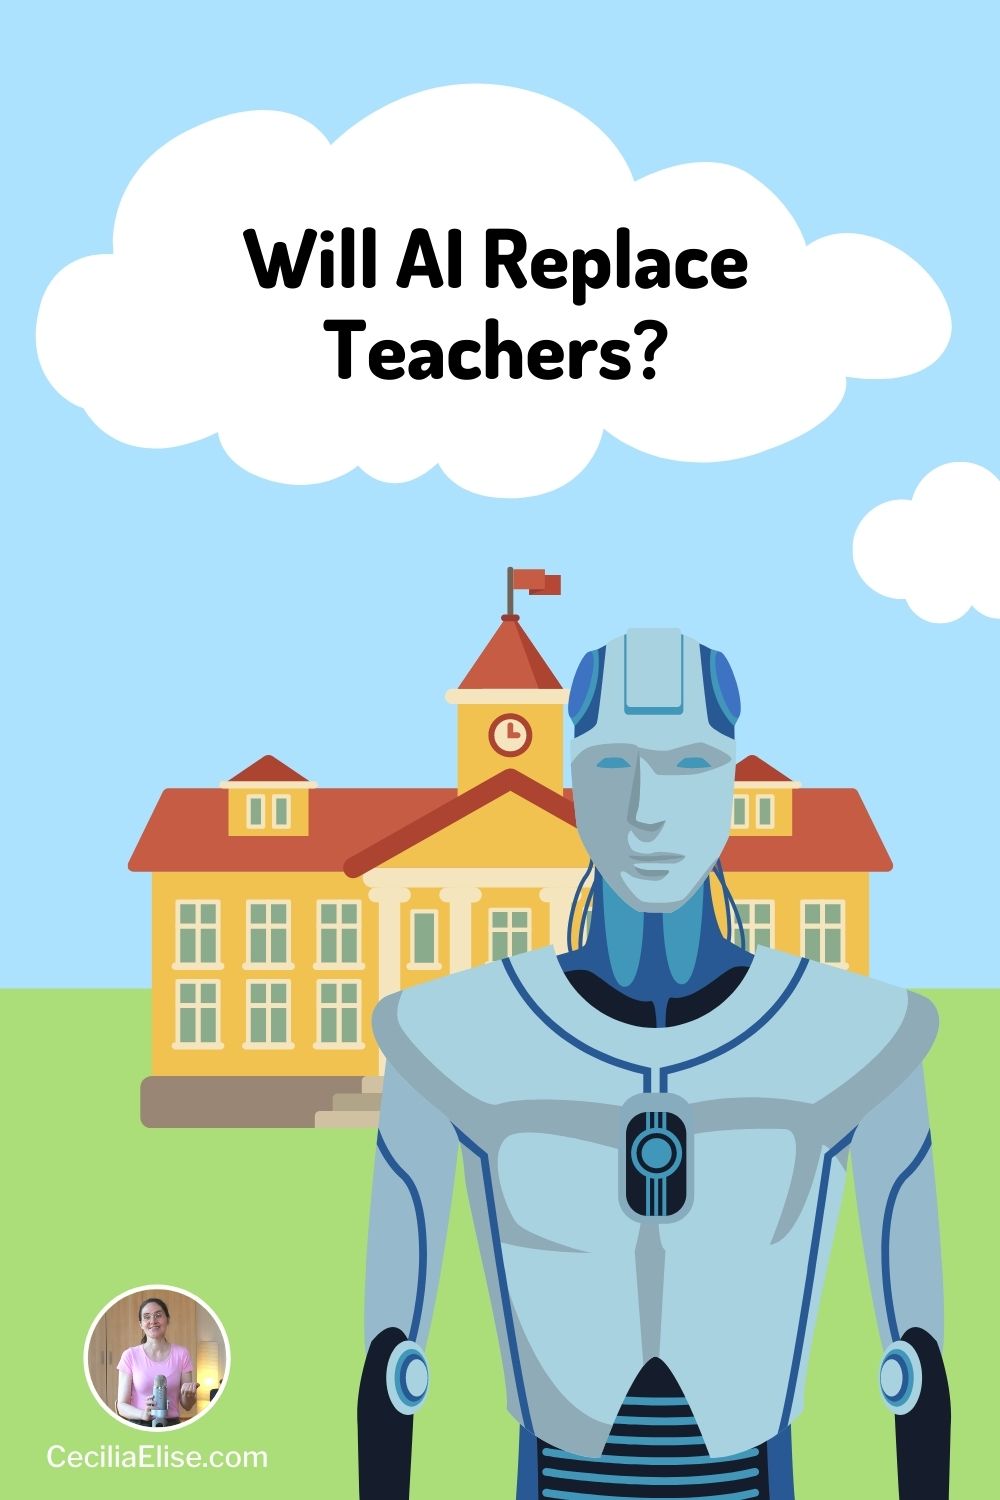 Will Artificial Intelligence Replace Teachers?